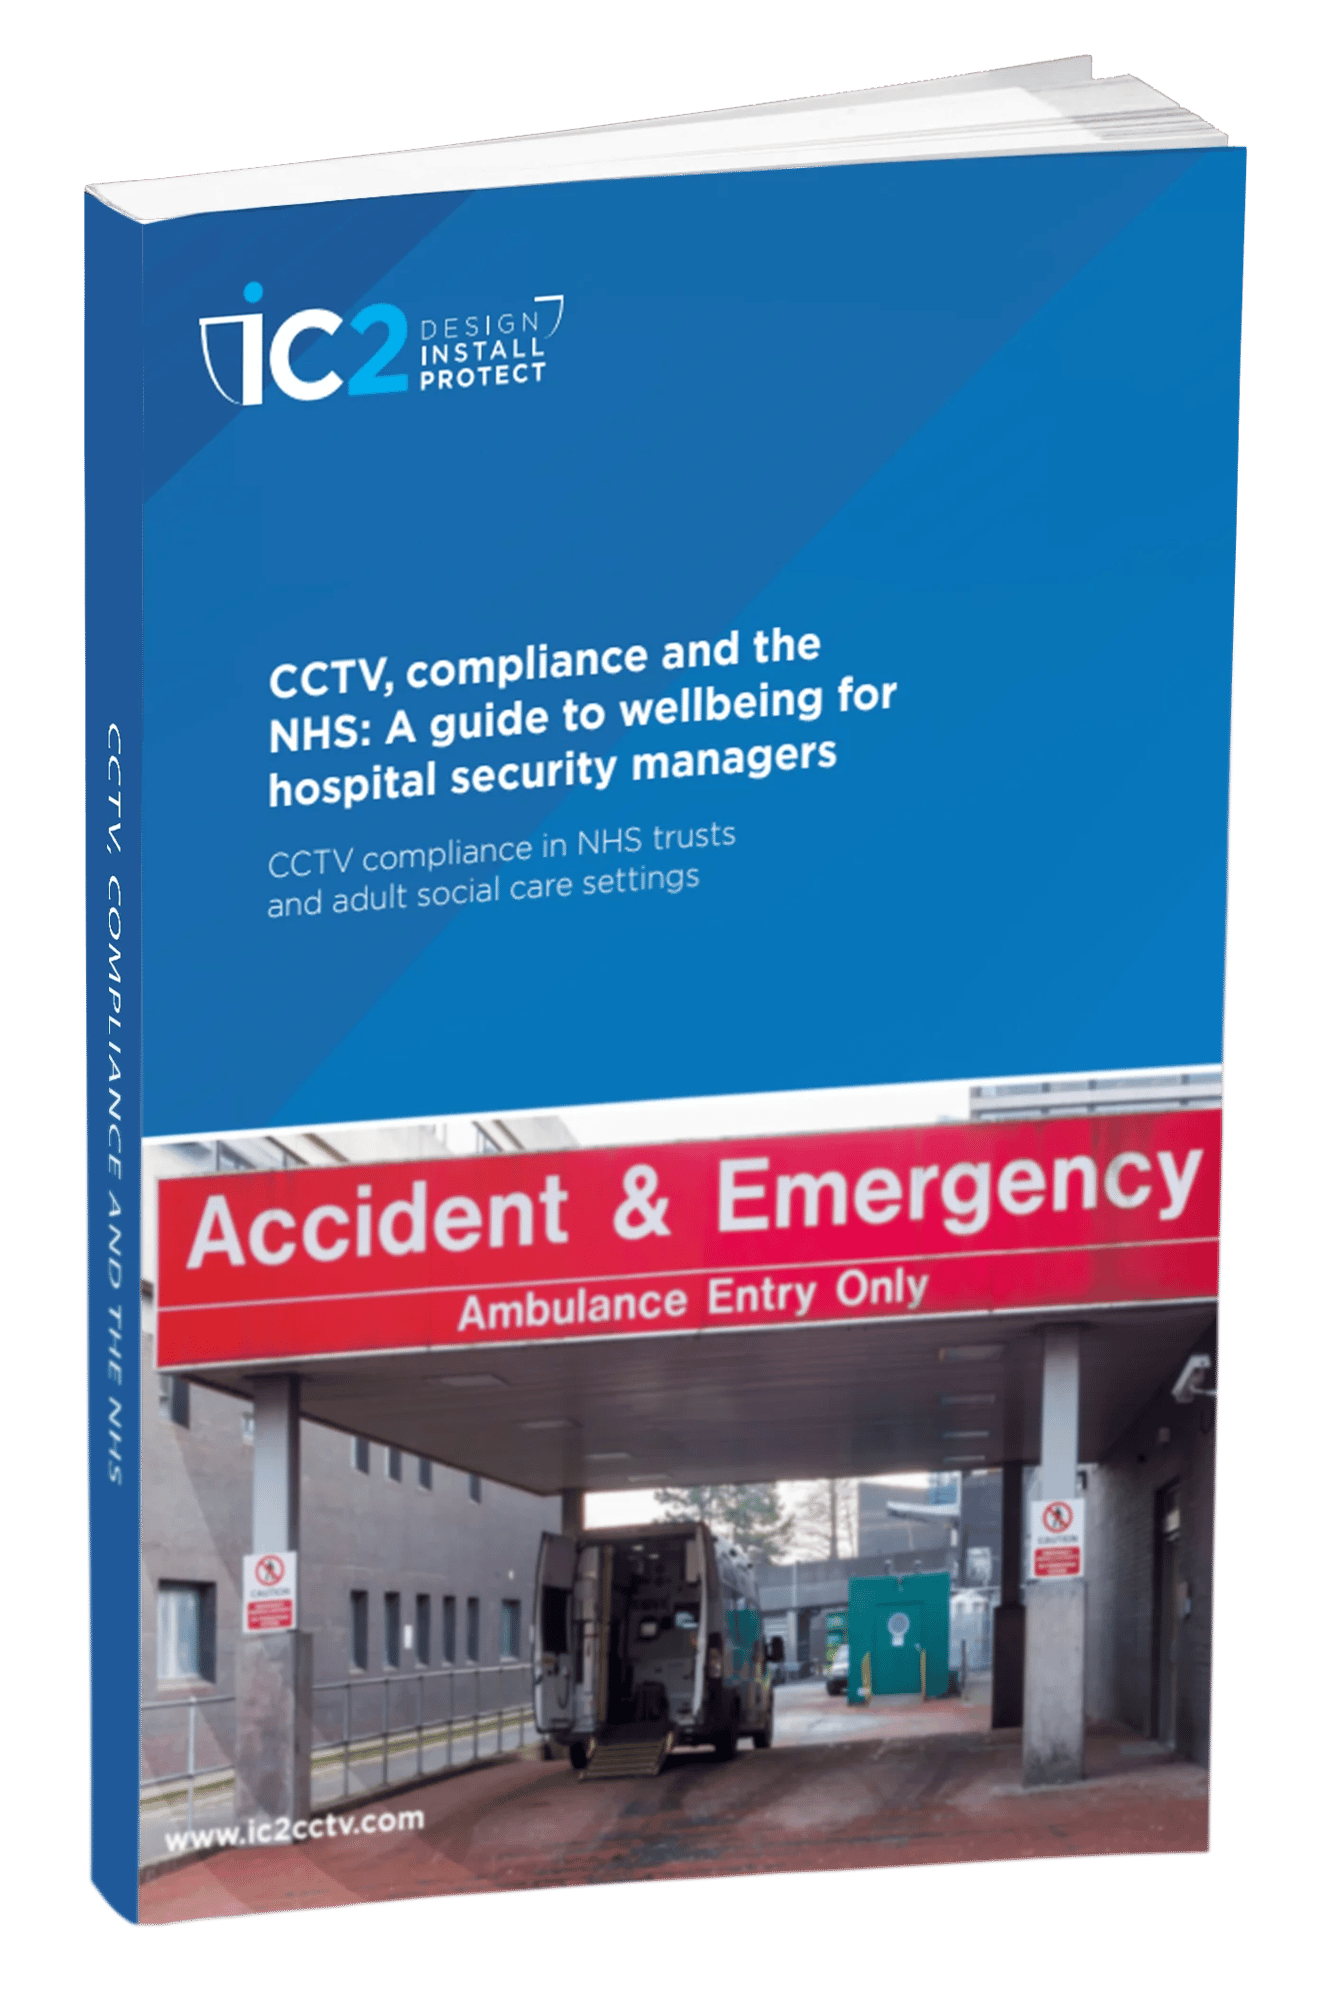 CCTV, Compliance And The NHS Ebook Cover Guide